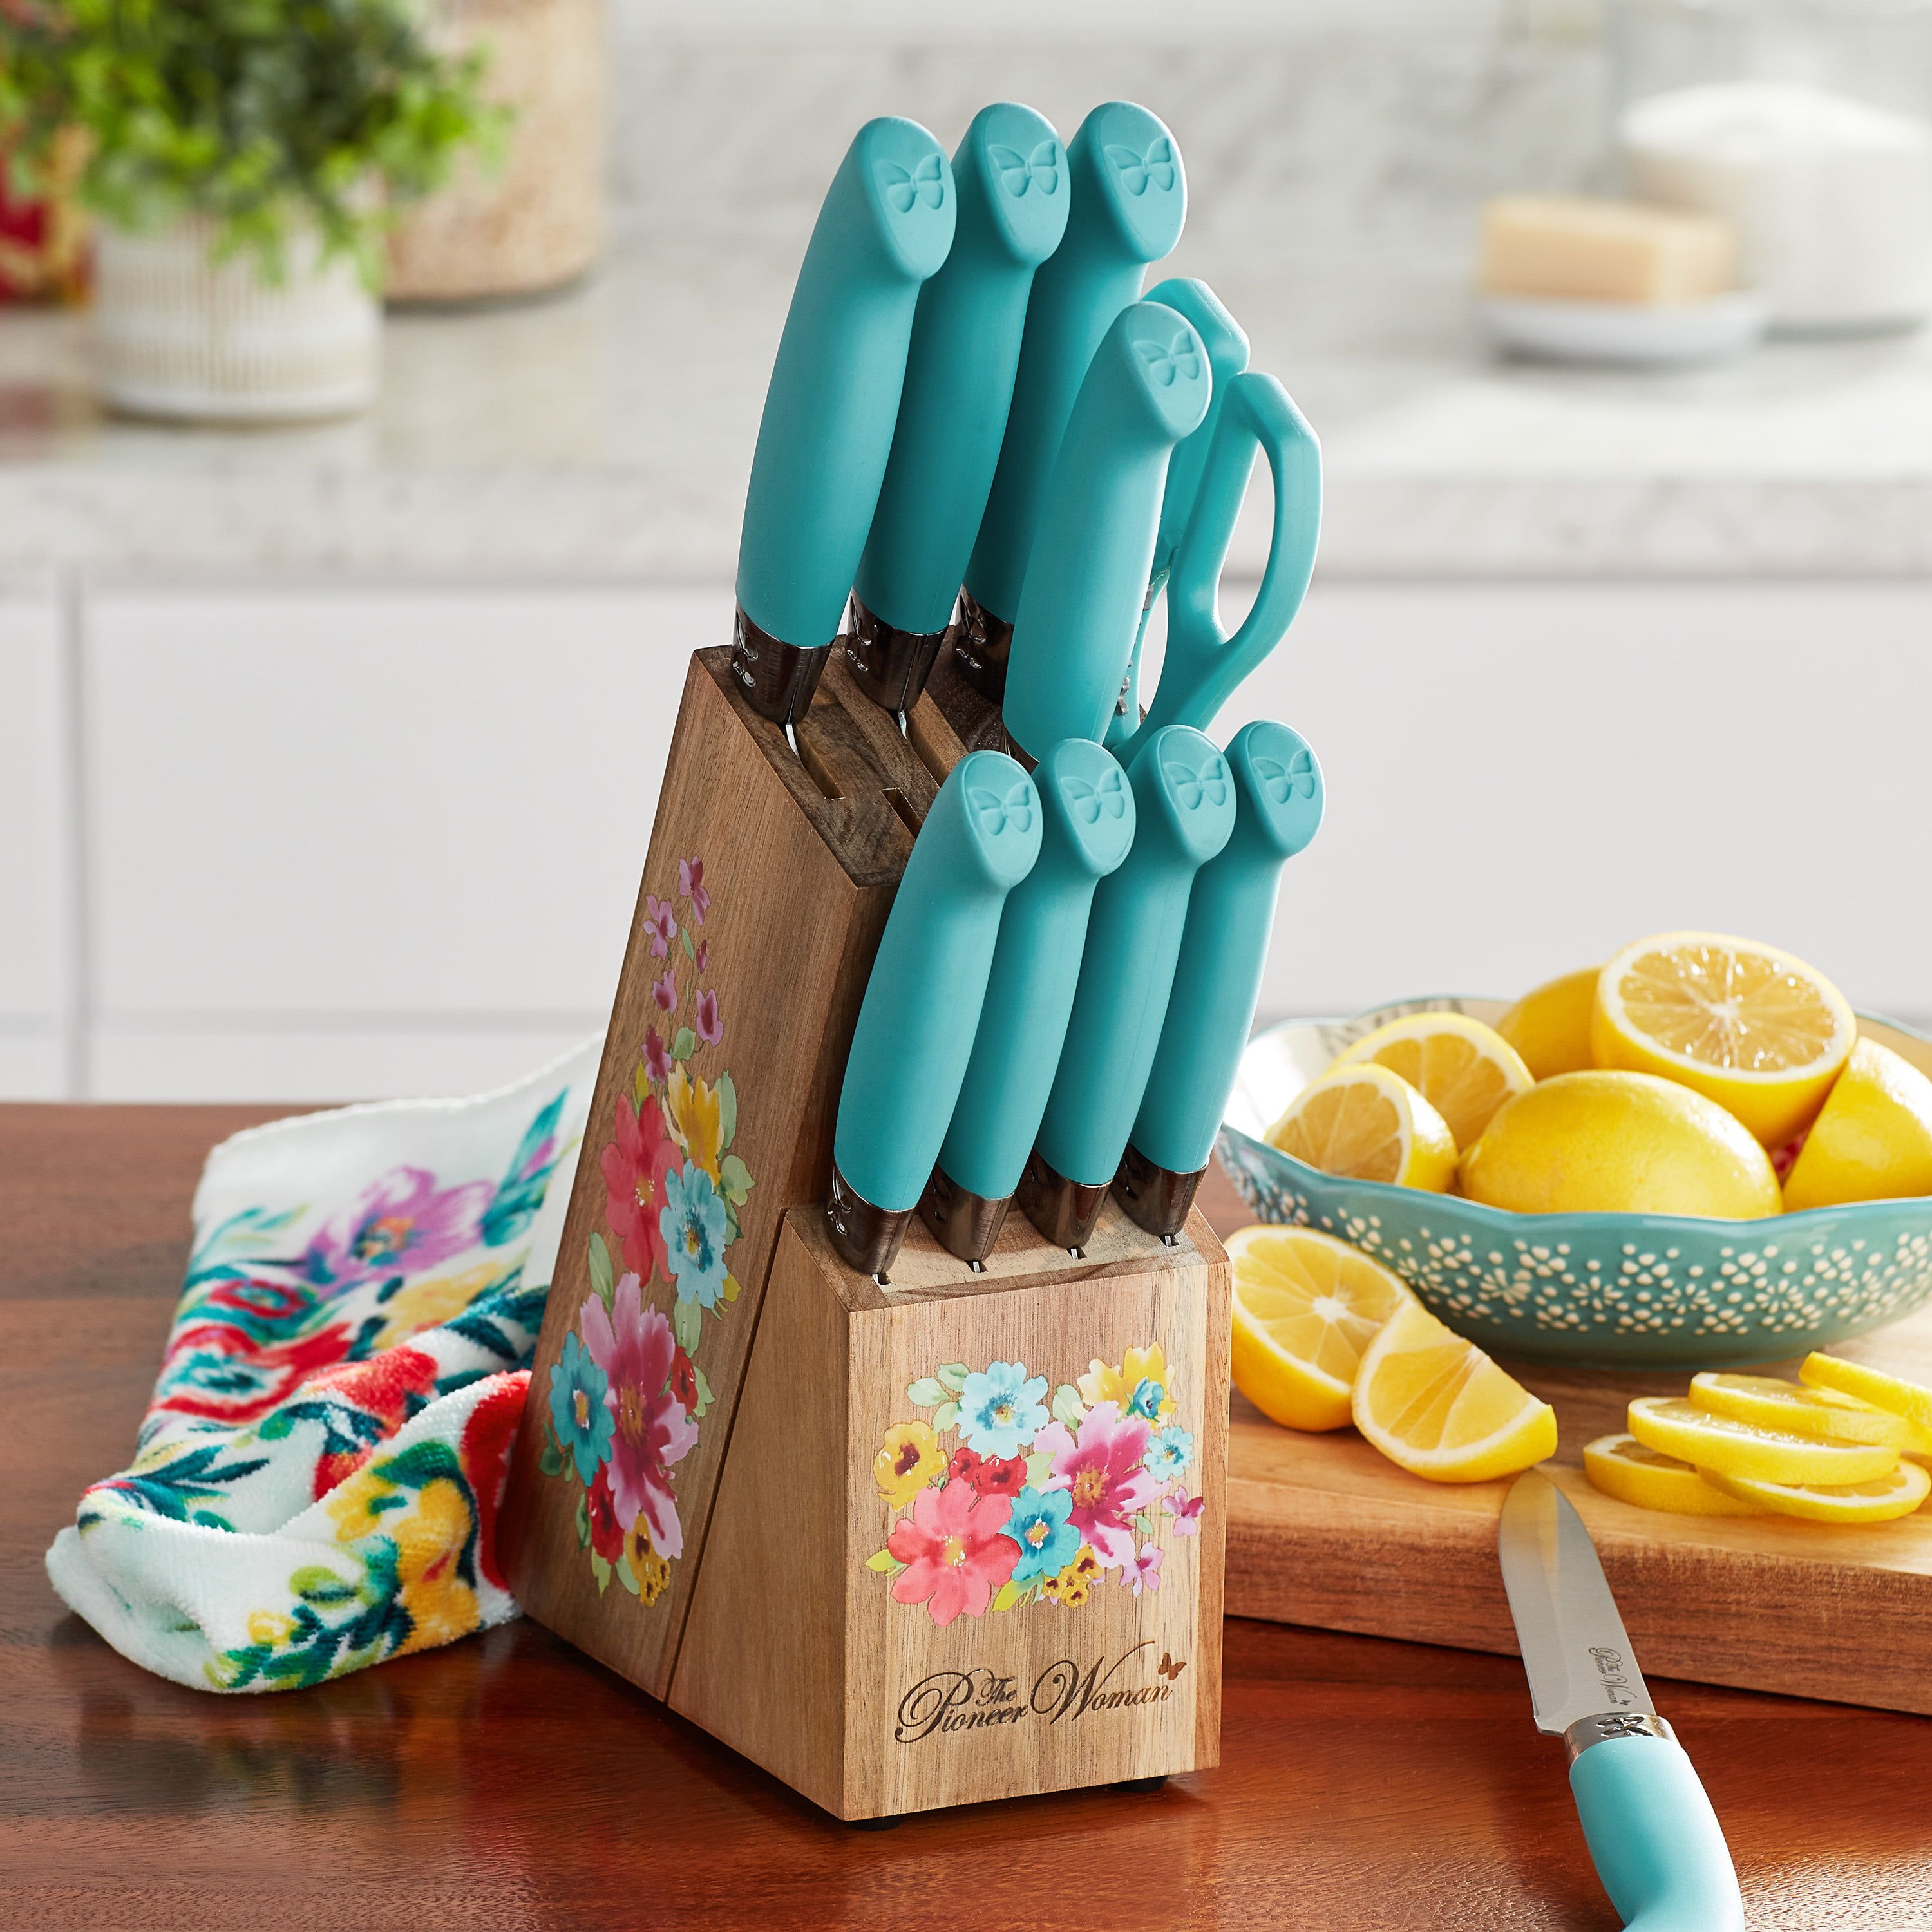 The Pioneer Woman Breezy Blossoms 11-Piece Stainless Steel Knife Block Set